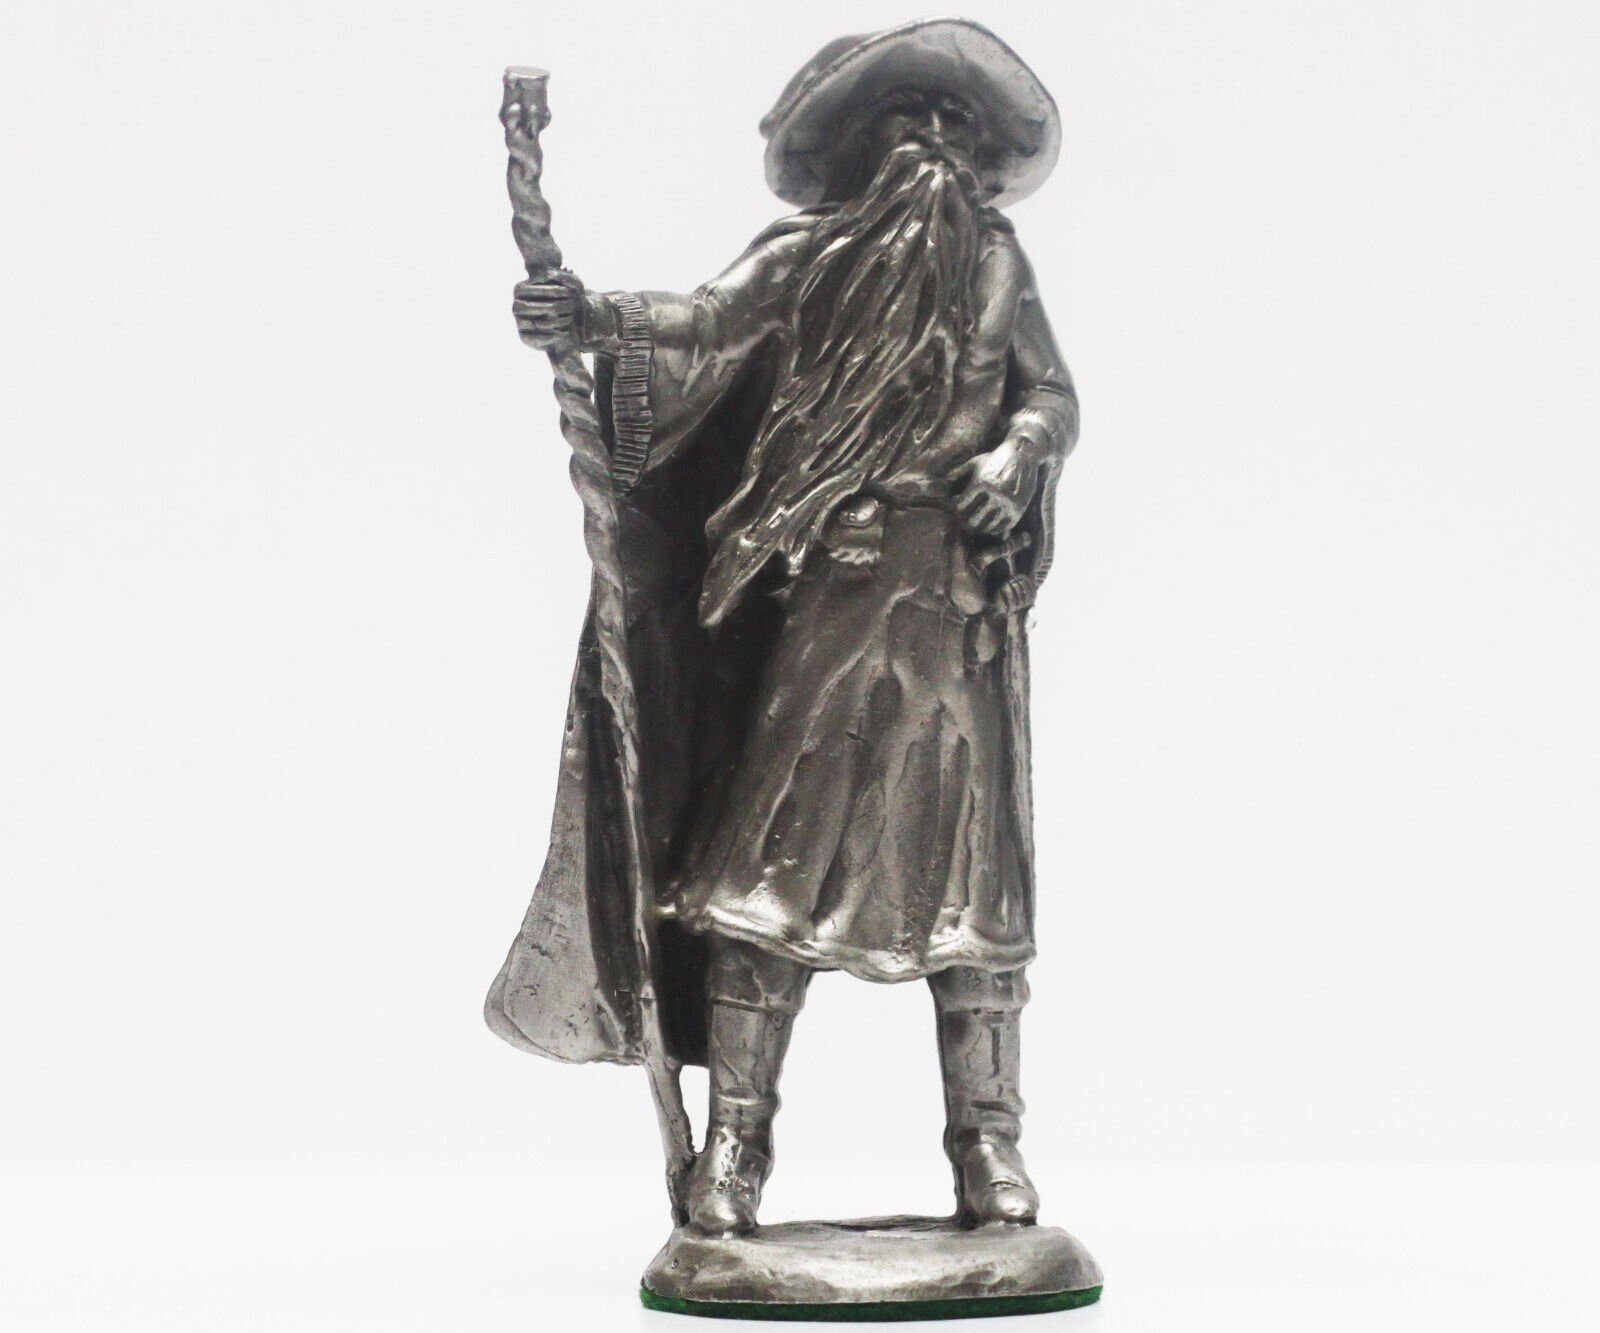 Vintage Rawcliffe Pewter 1983 Lord of the Rings Chess Piece Figurine Gandalf